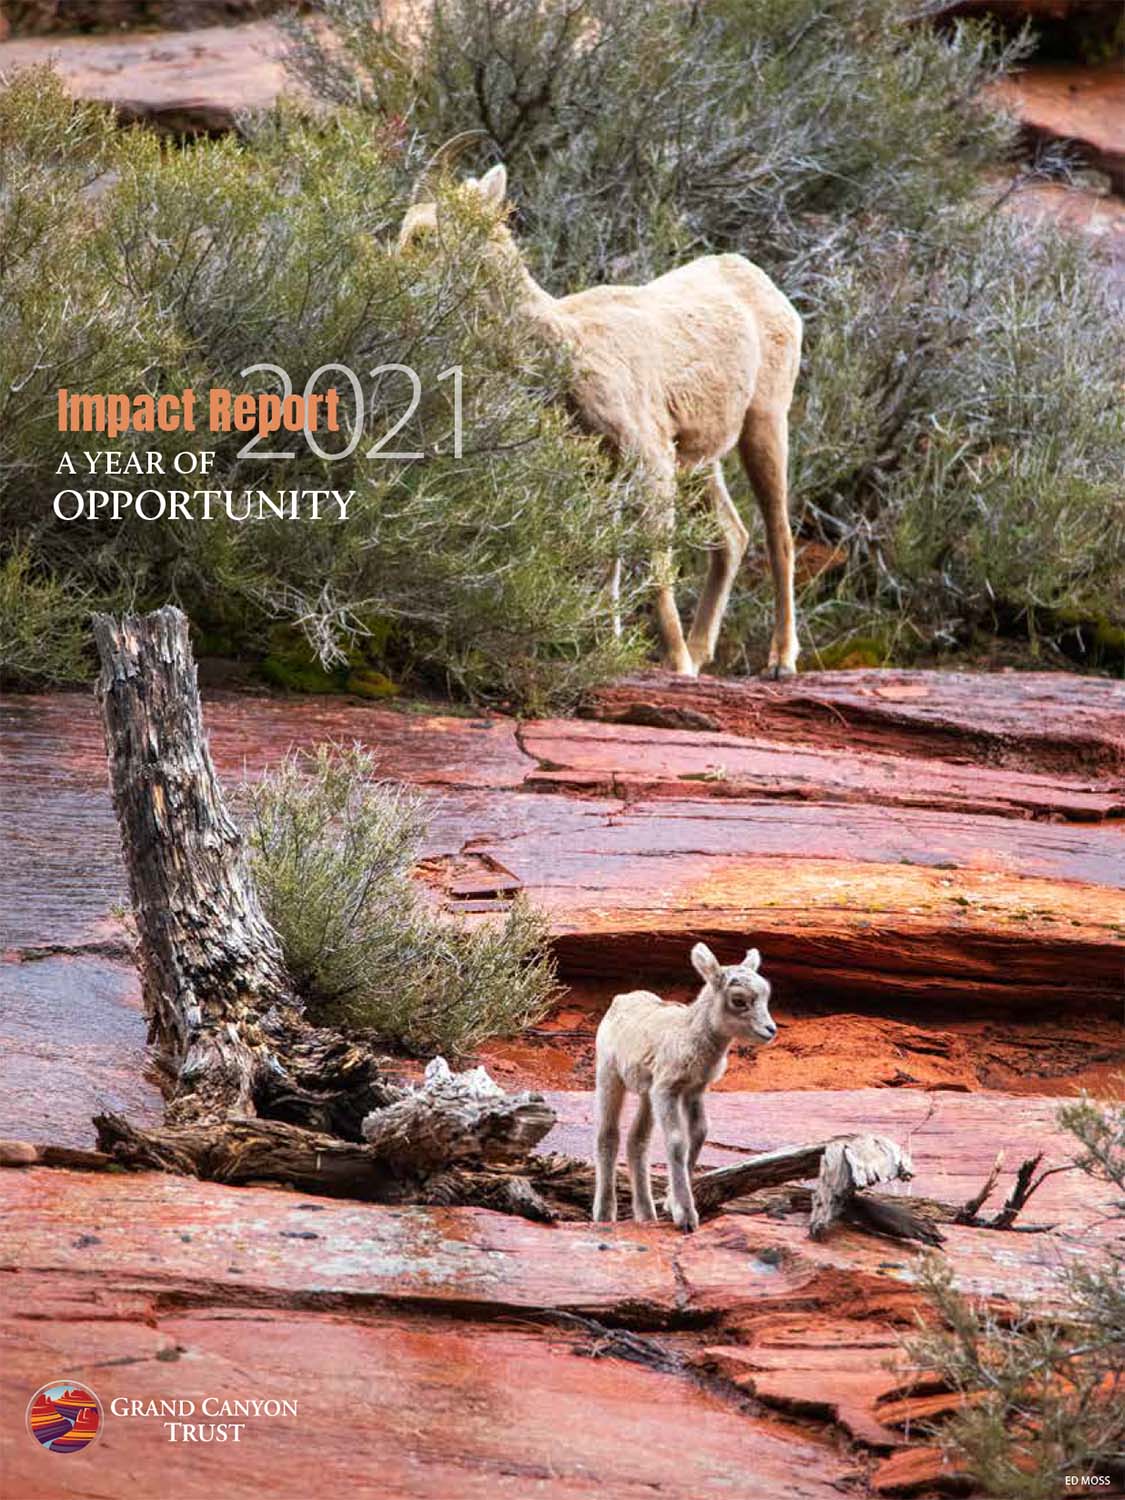 The Grand Canyon Trust Impact Report 2021